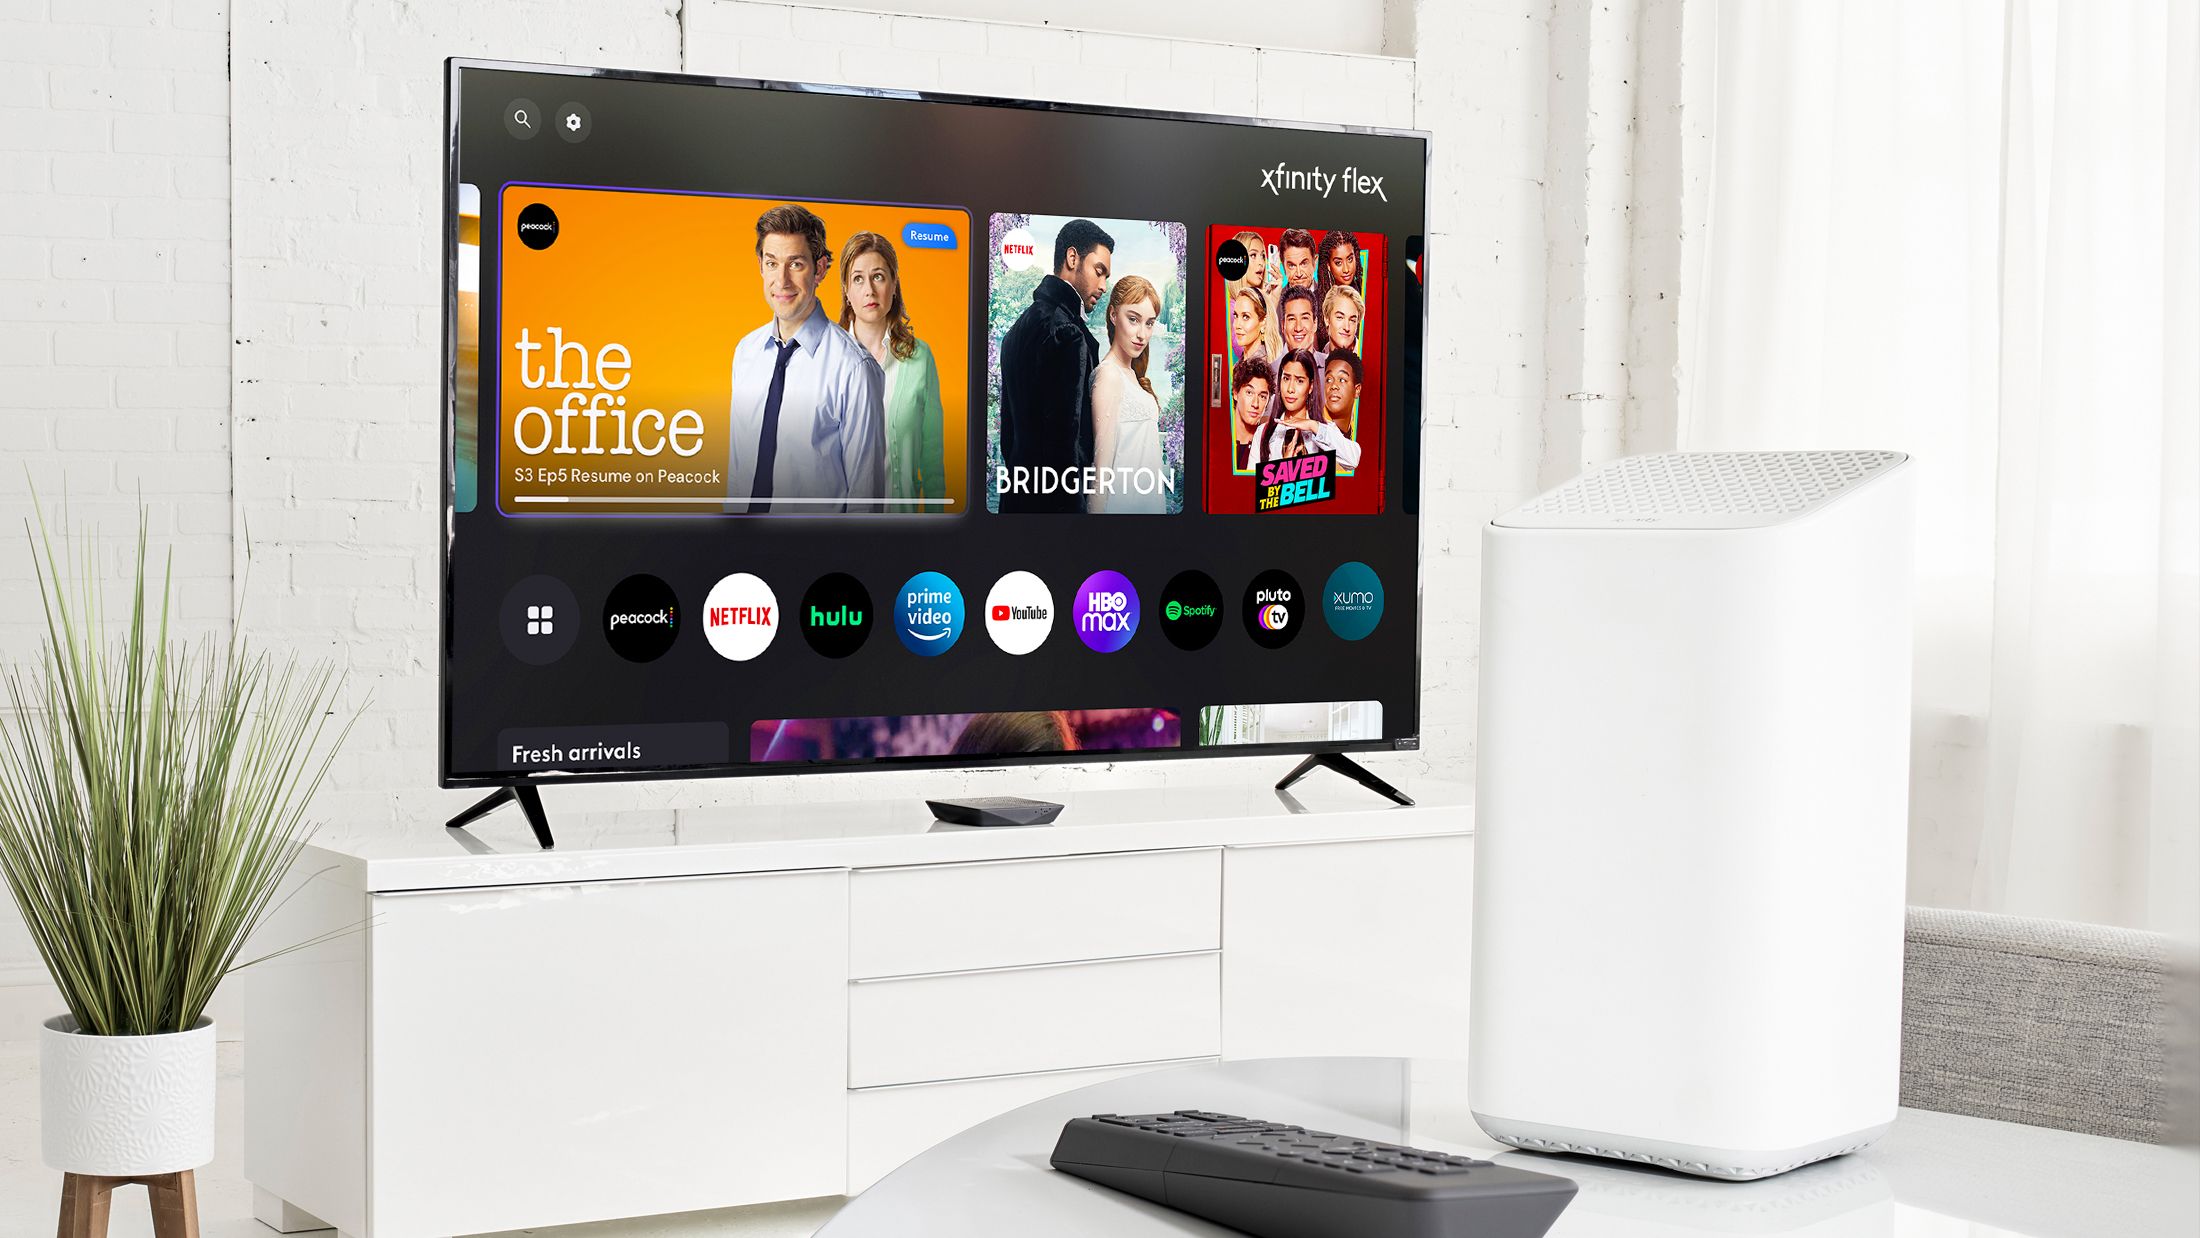 A television with the Xfinity Flex homescreen with a remote and gateway in the foreground